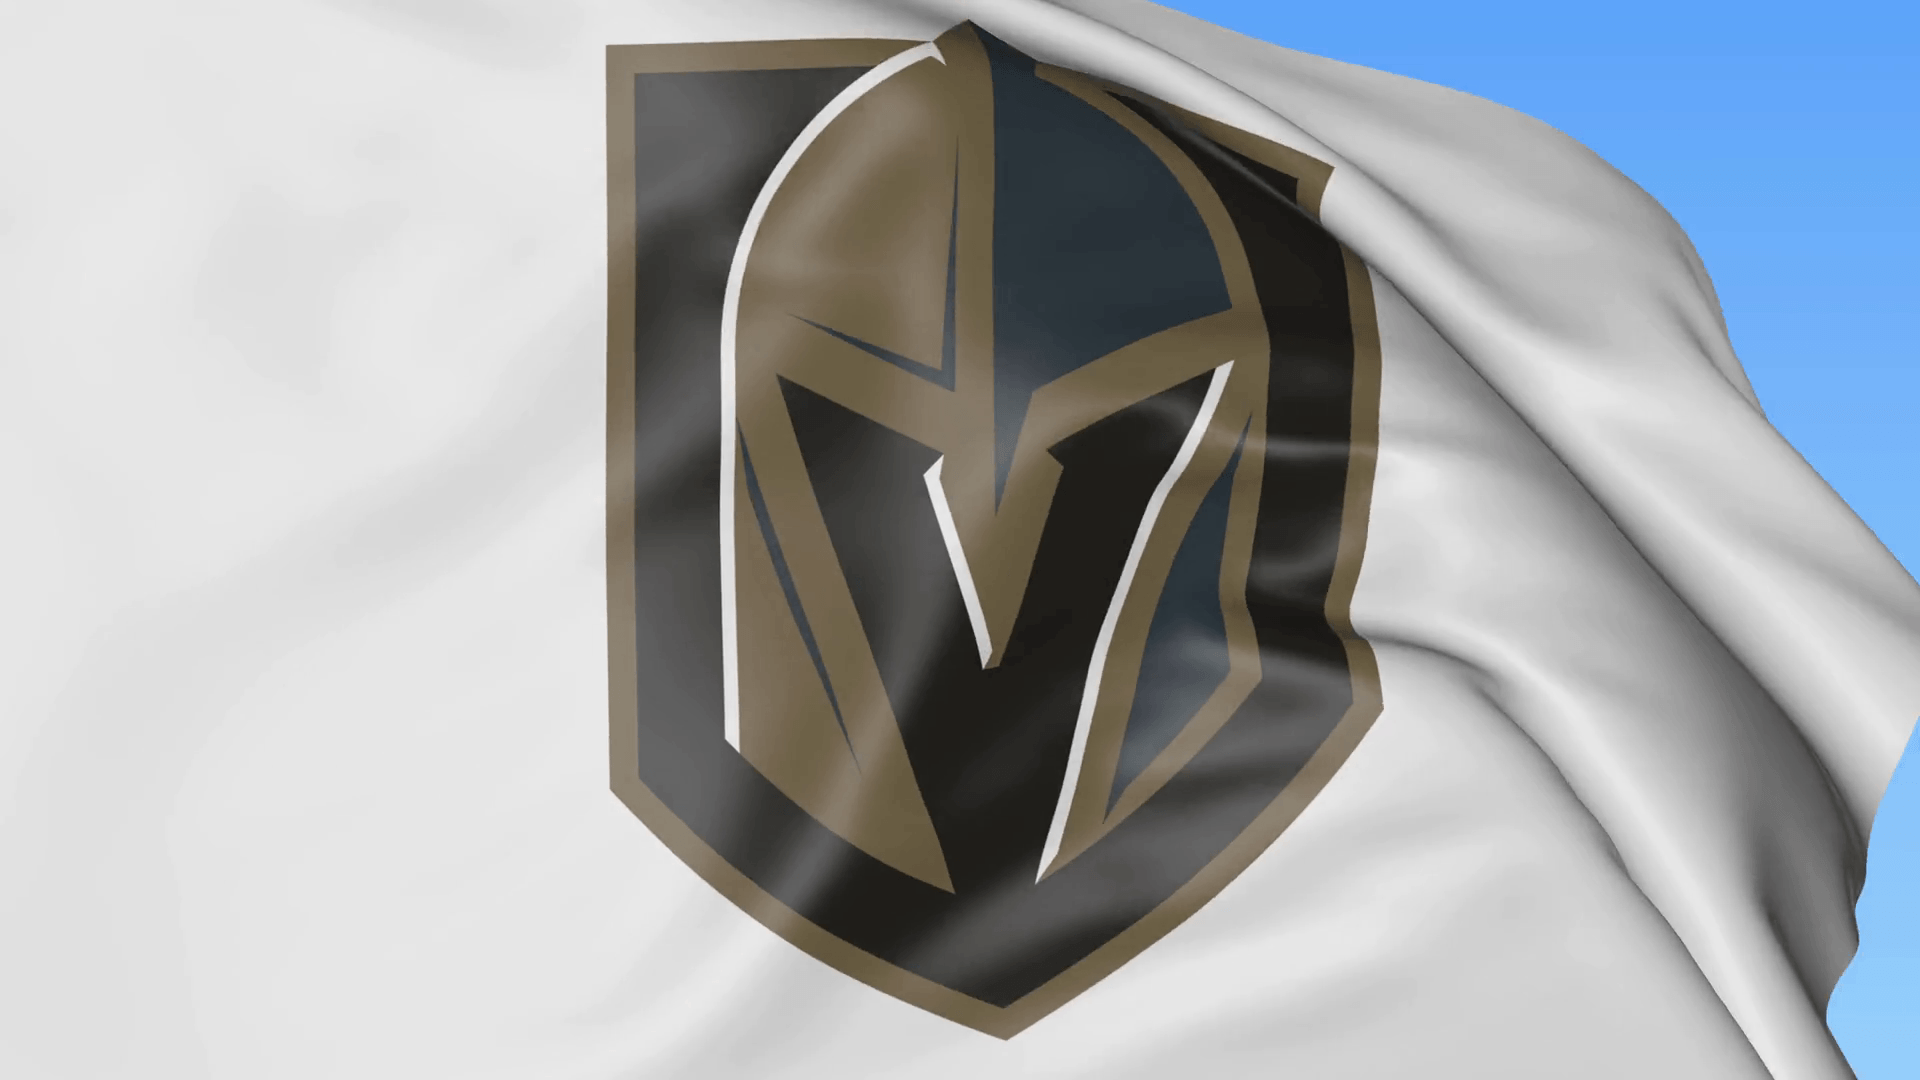 Close Up Of Waving Flag With Vegas Golden Knights NHL Hockey Team